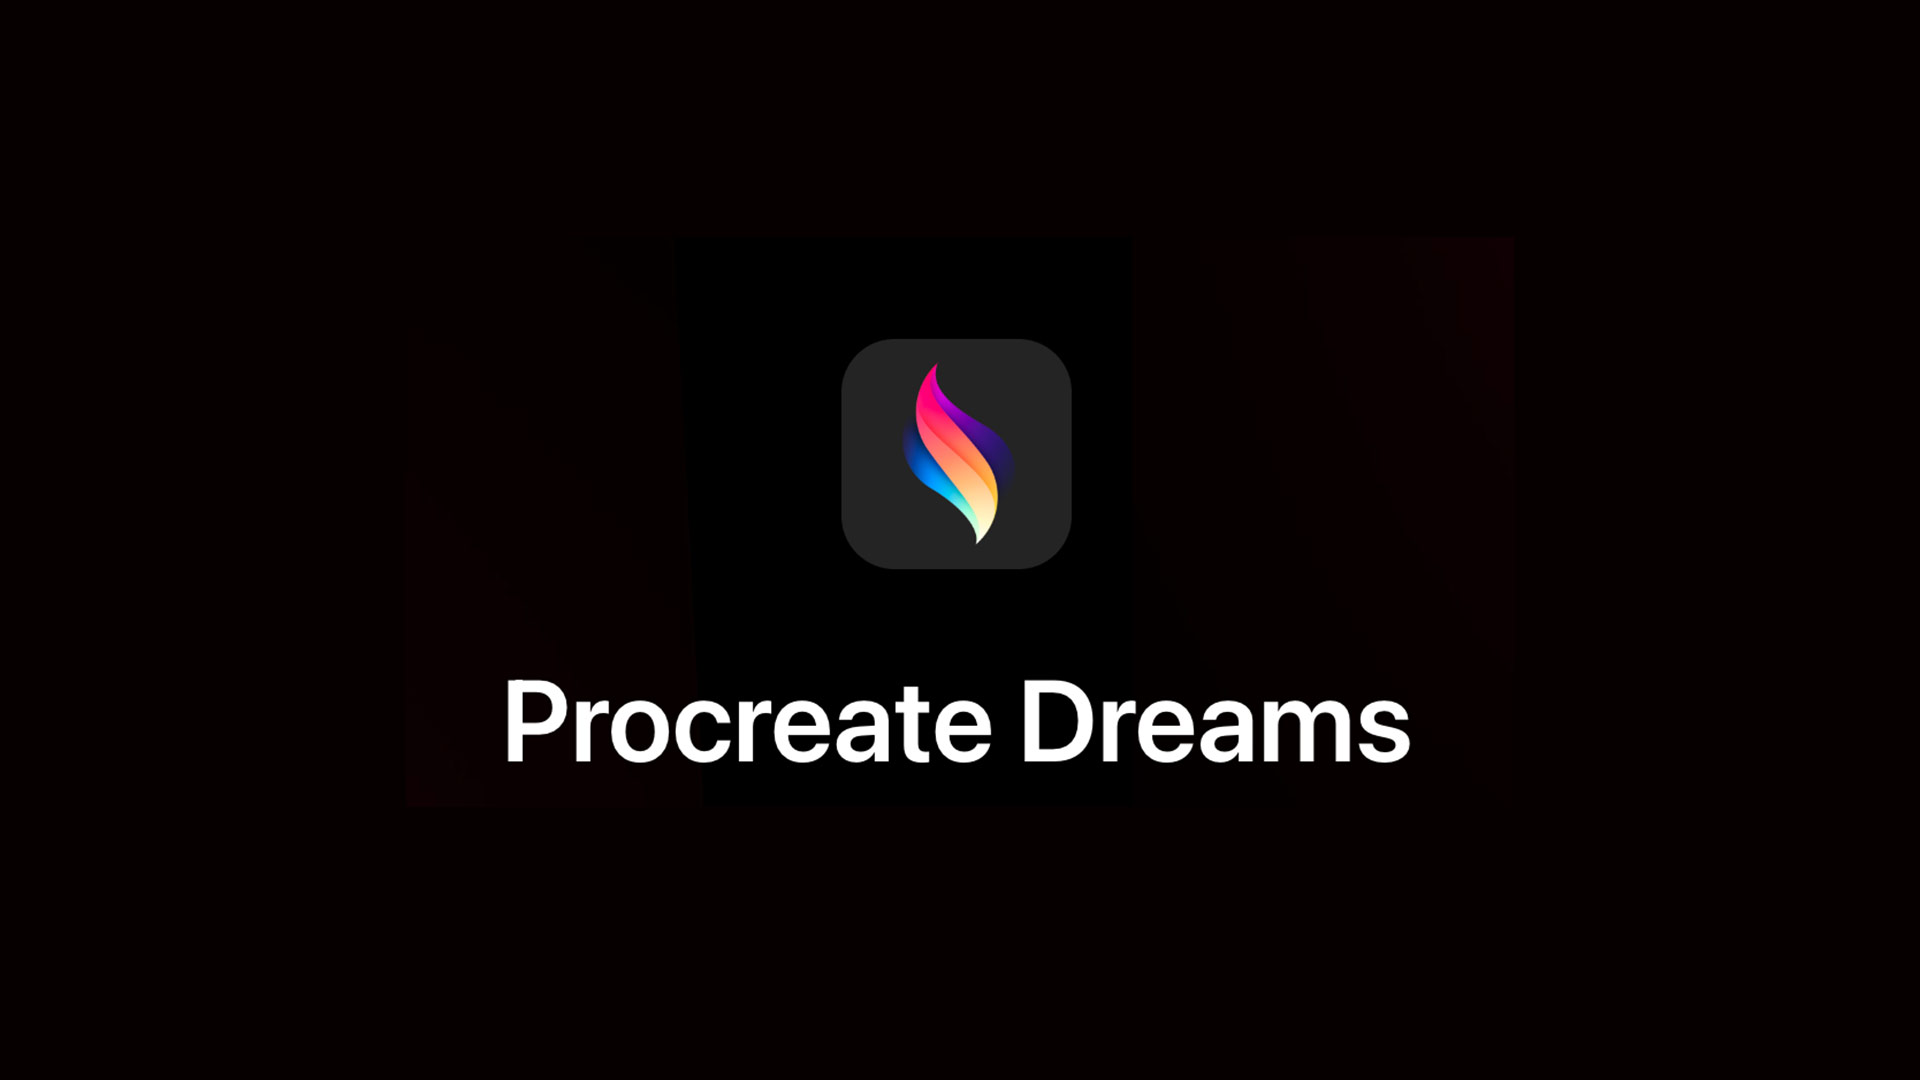 how to get procreate dreams for free